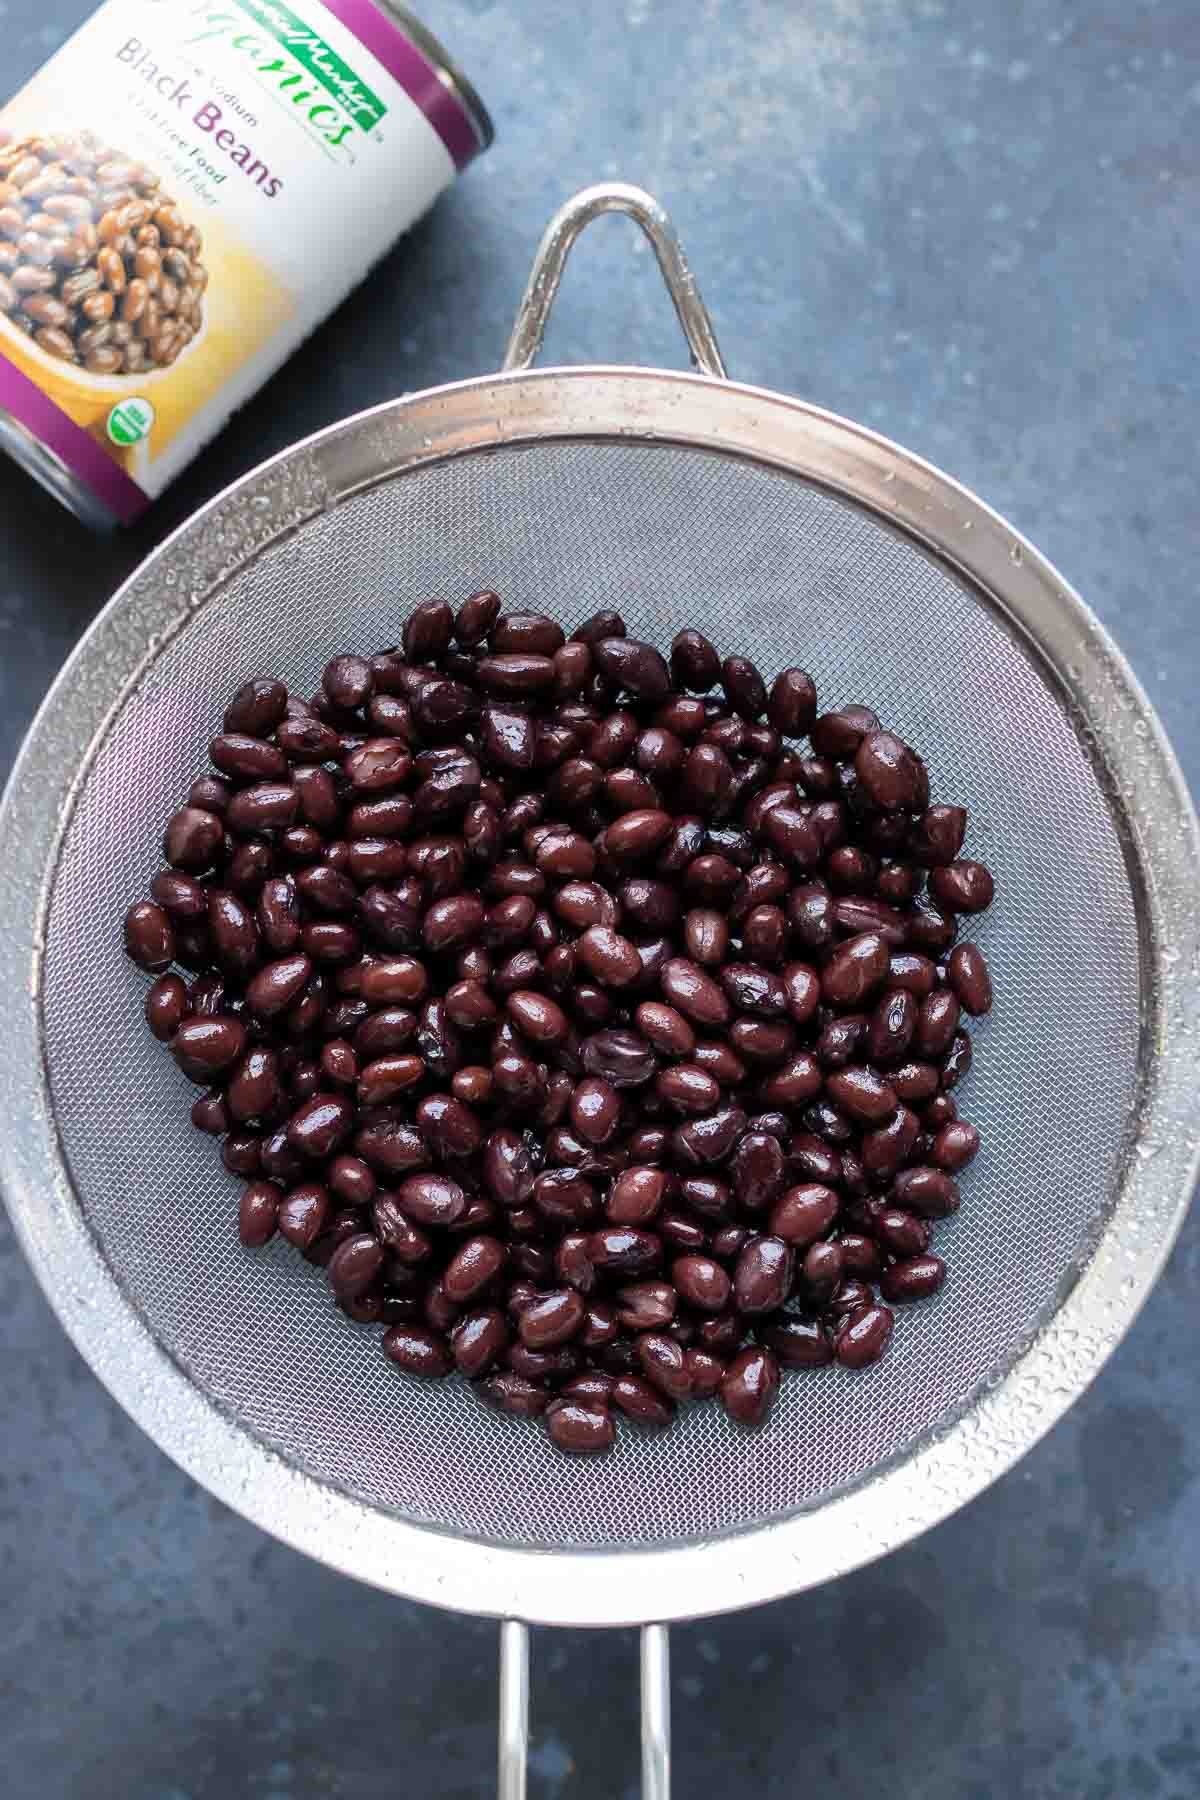 Black beans draining in a metal strainer with the original can in the background.